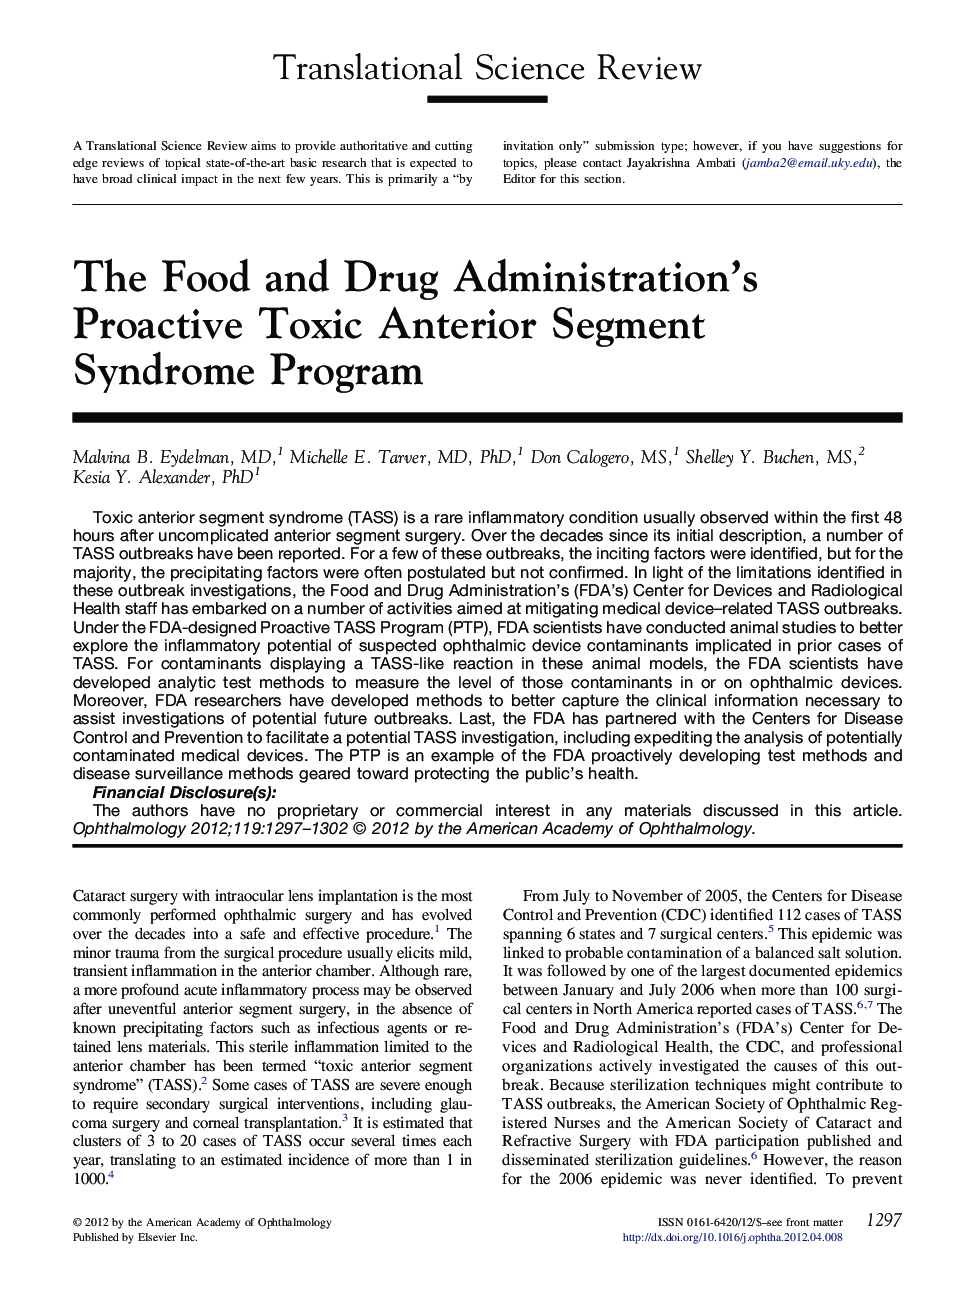 The Food and Drug Administration's Proactive Toxic Anterior Segment Syndrome Program